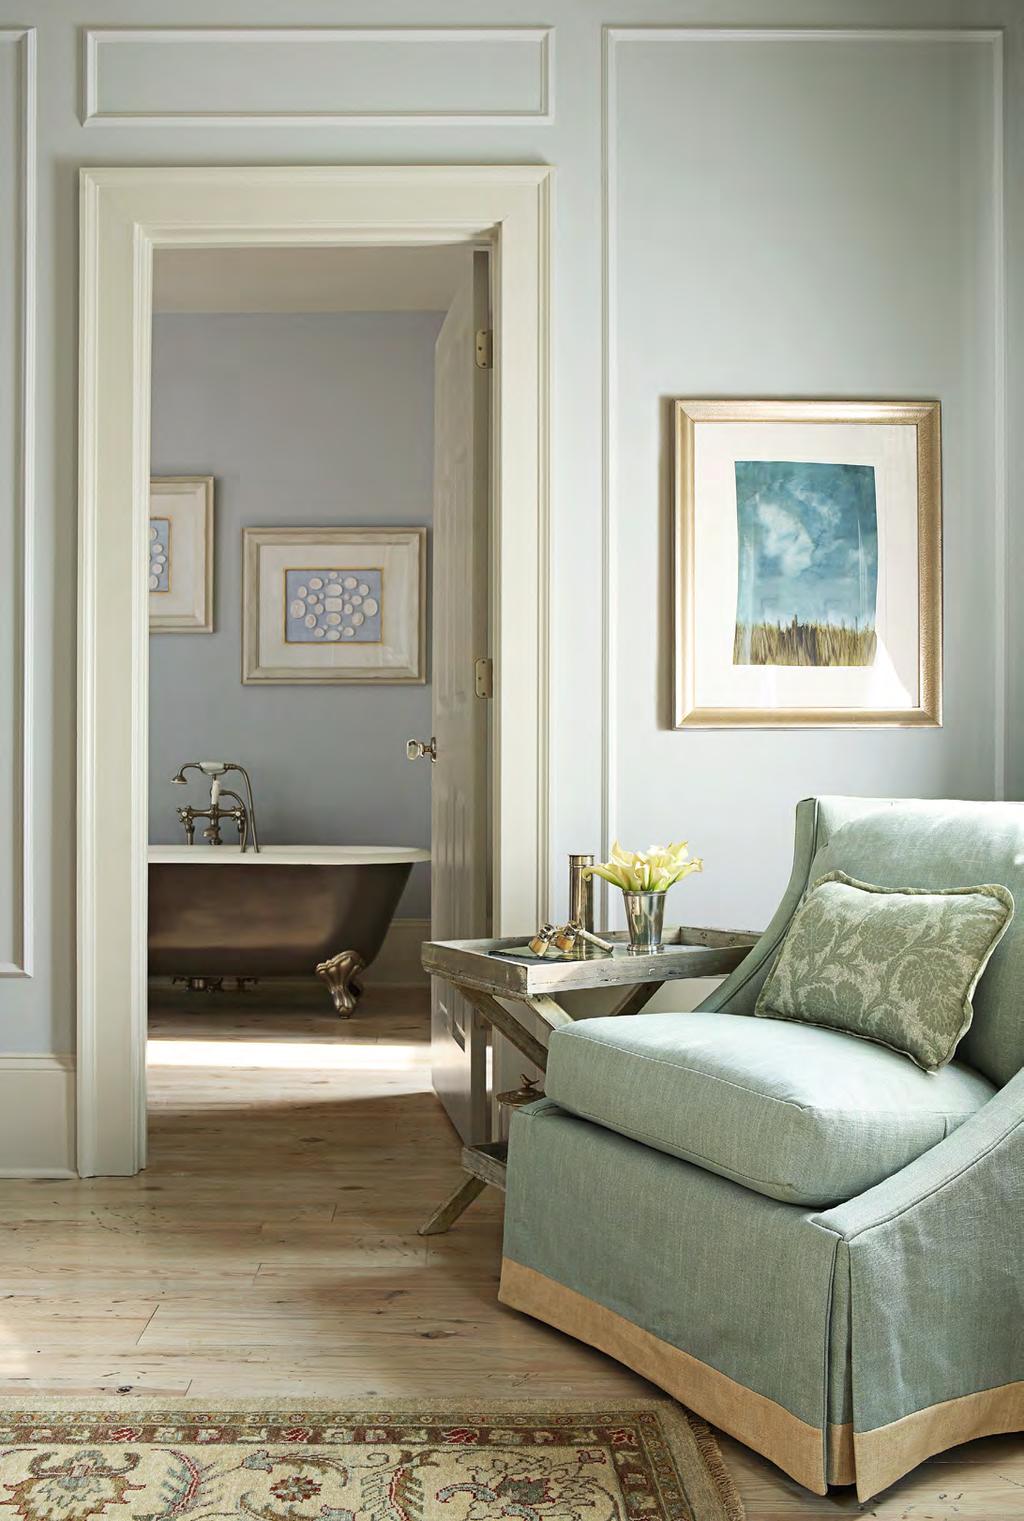 THIS PHOTO: A slipcovered linen side chair is a transition between the master bedroom and bath.